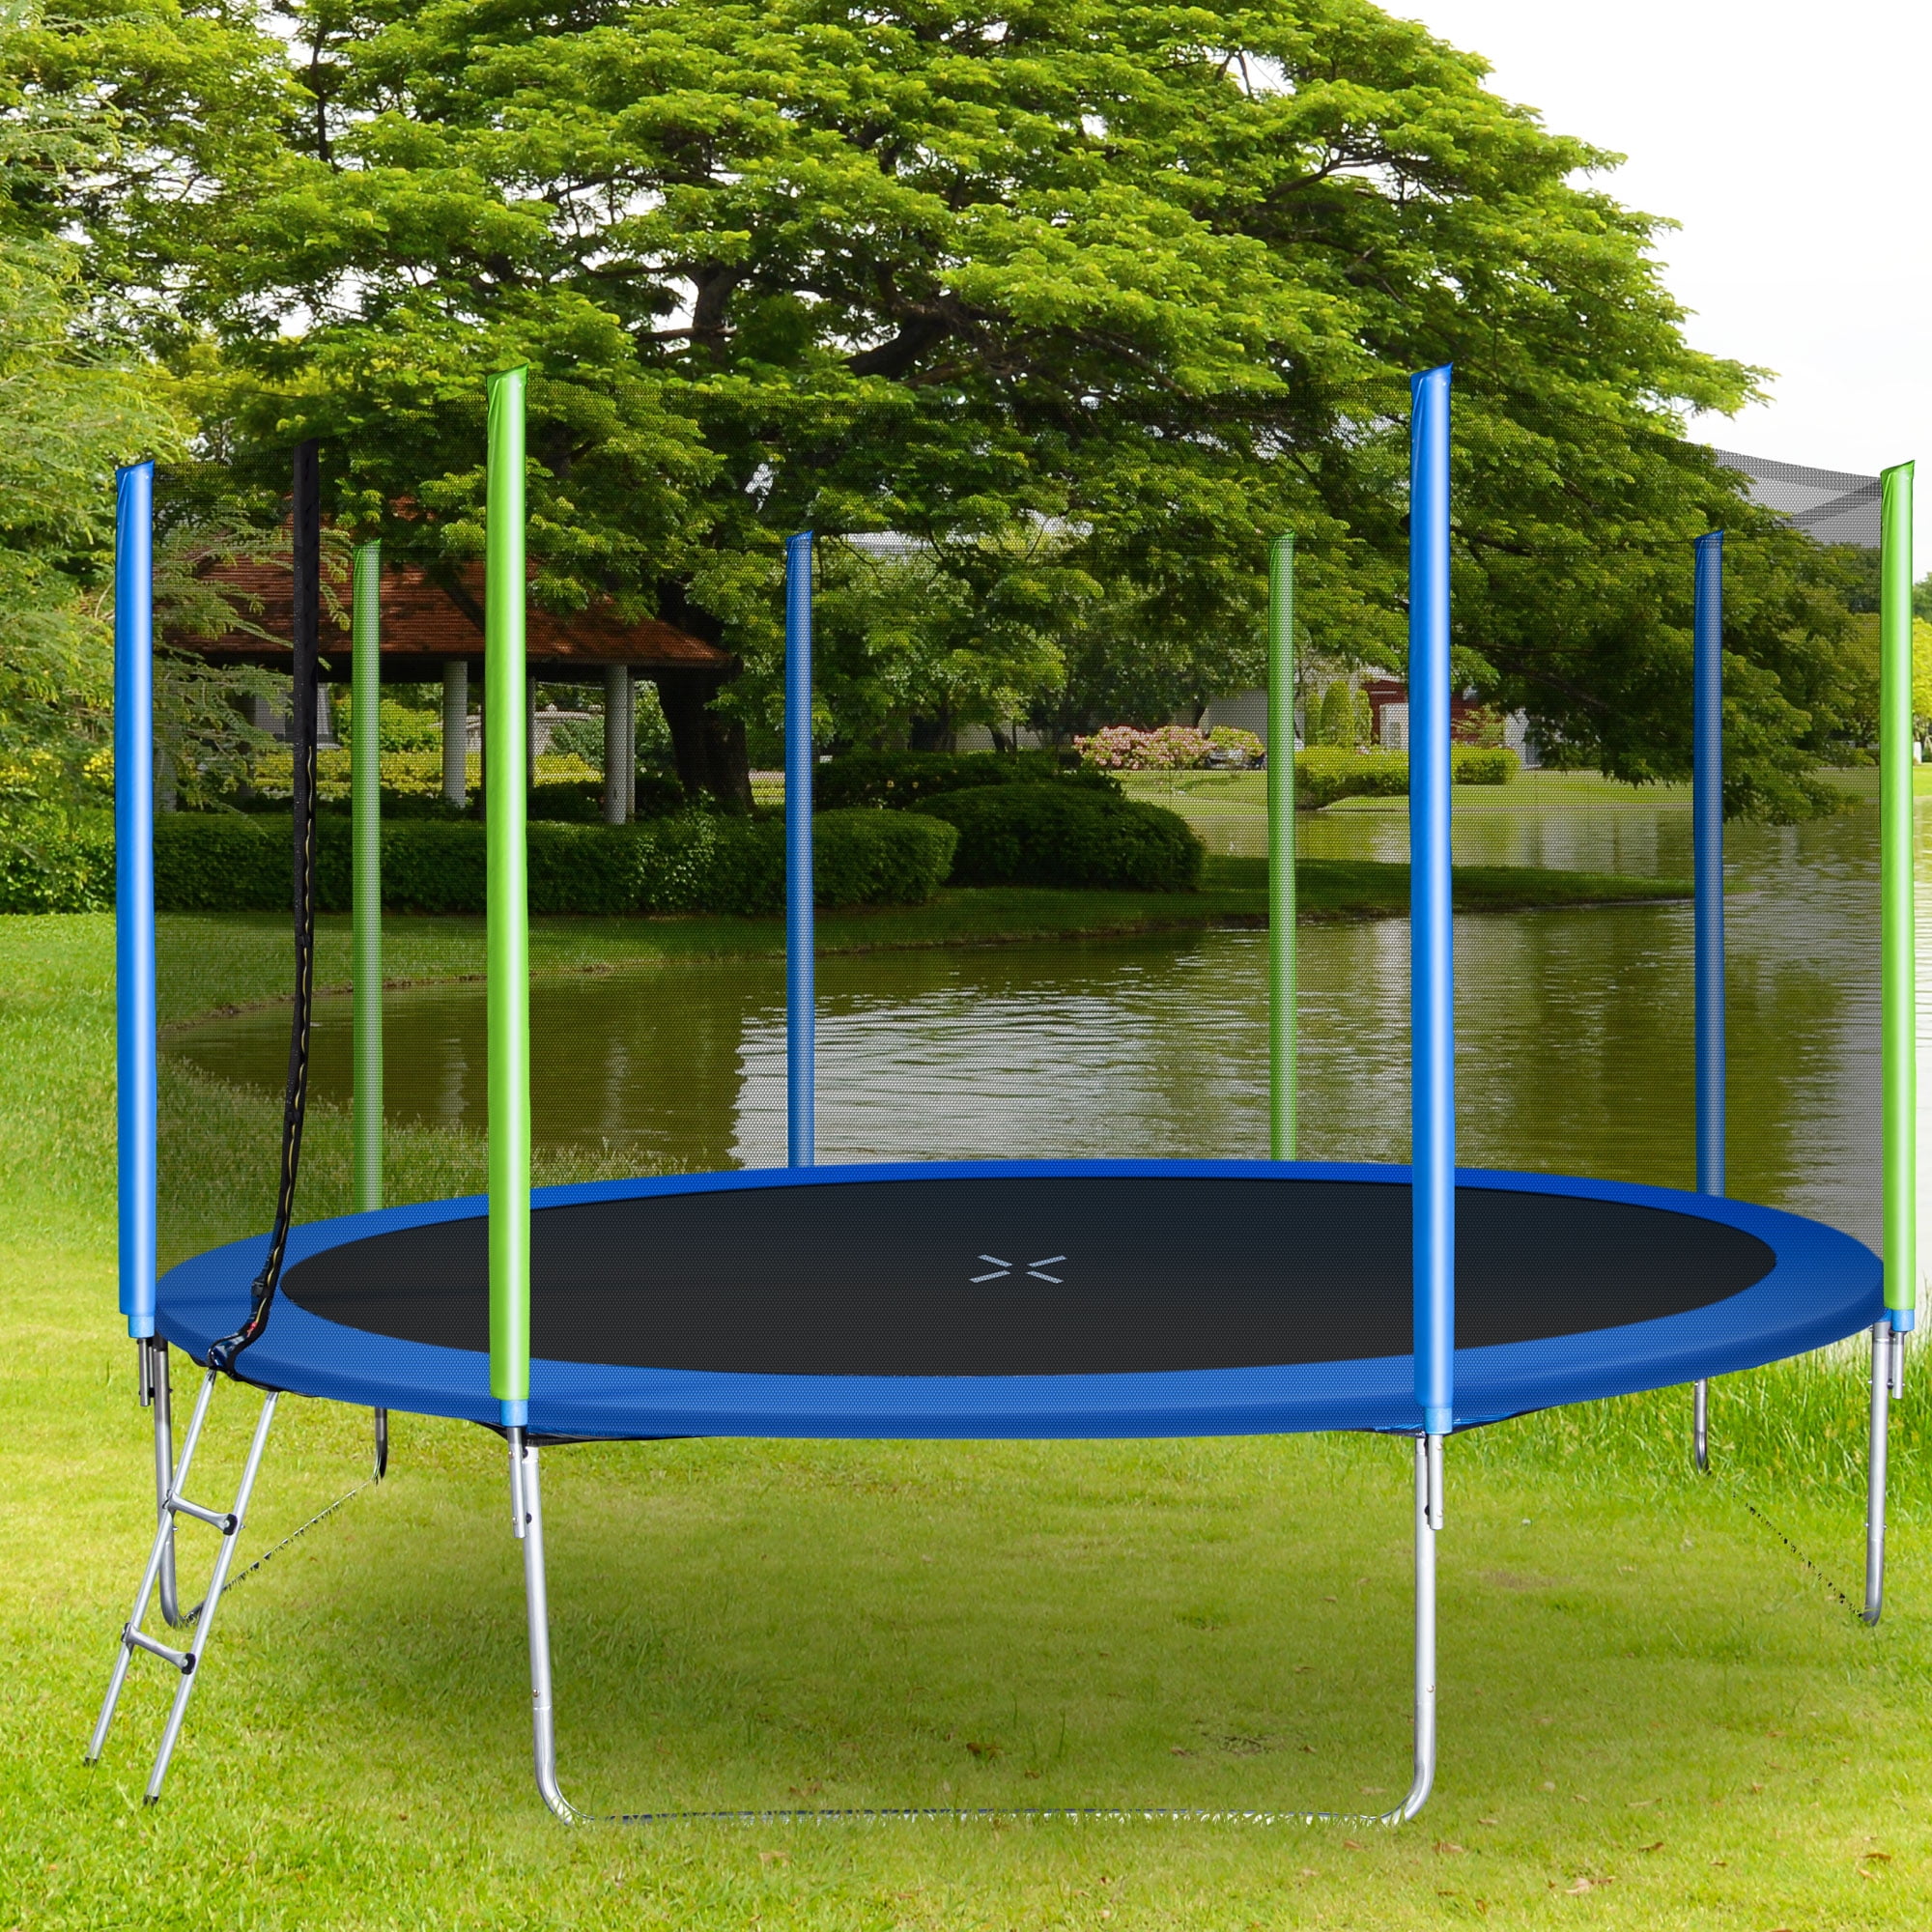 Details about   12Ft Trampoline for kids Safe Jumping Mat W/ Enclosure Net Spring Cover Padding 